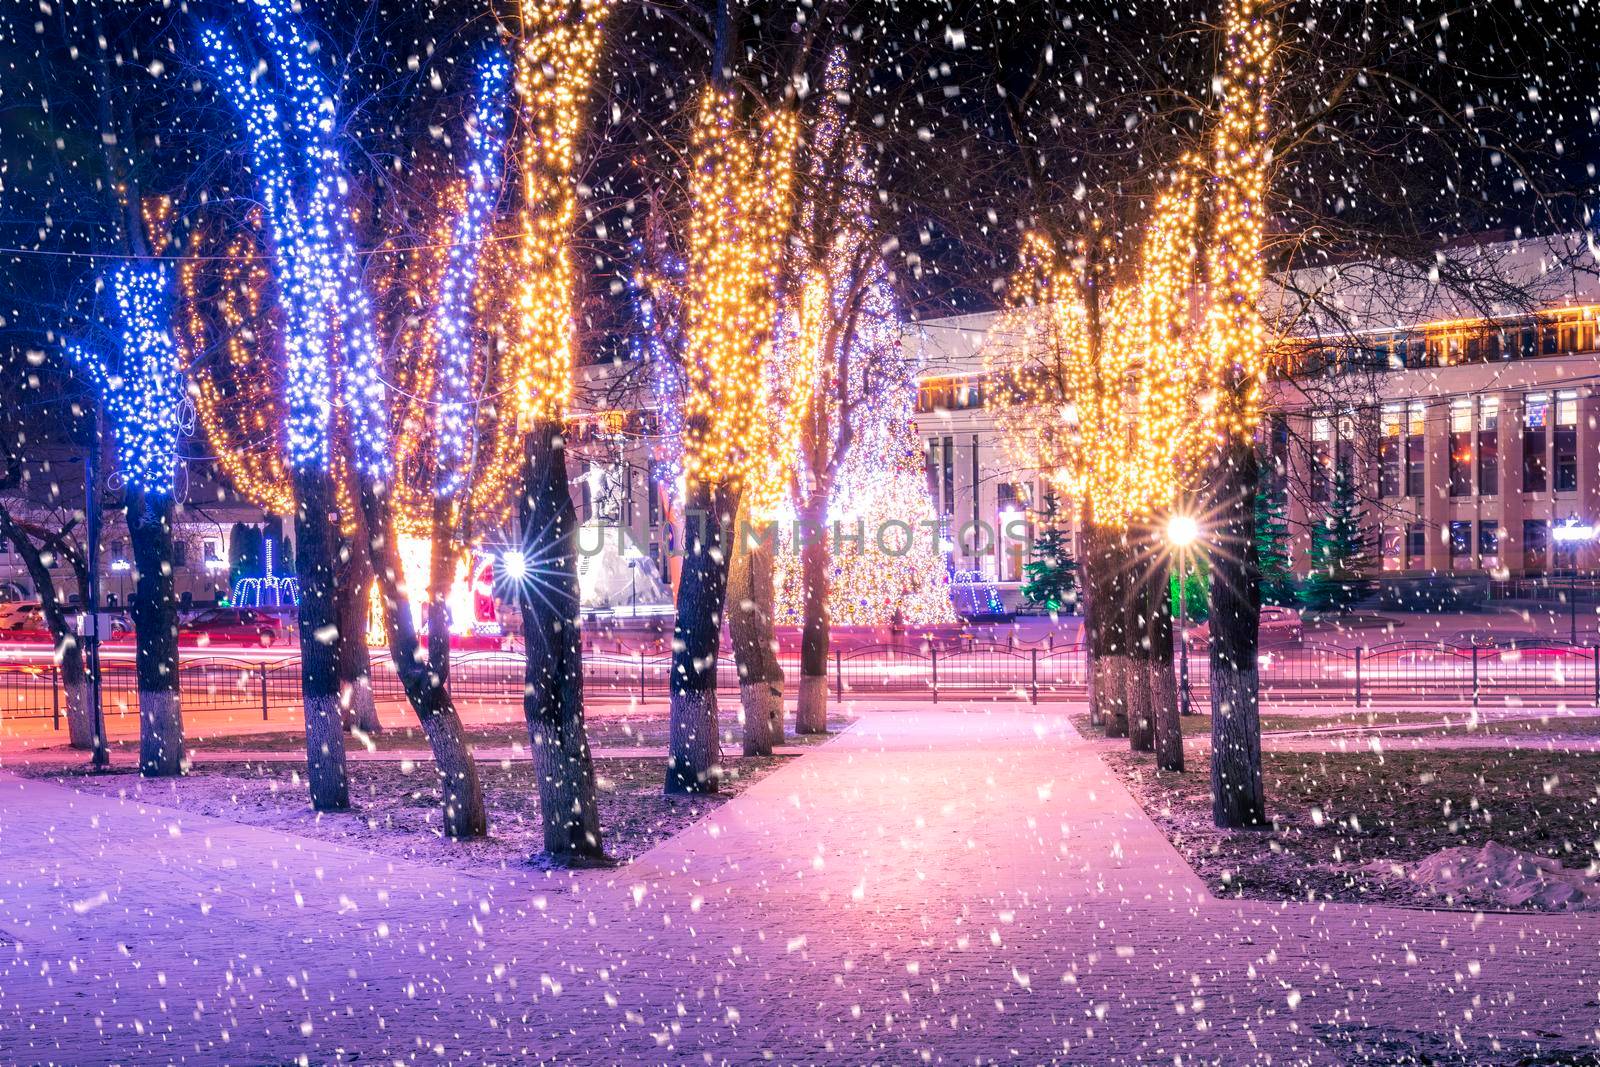 Snowfall in a winter night park with christmas decorations, lights, pavement covered with snow and trees. by Eugene_Yemelyanov